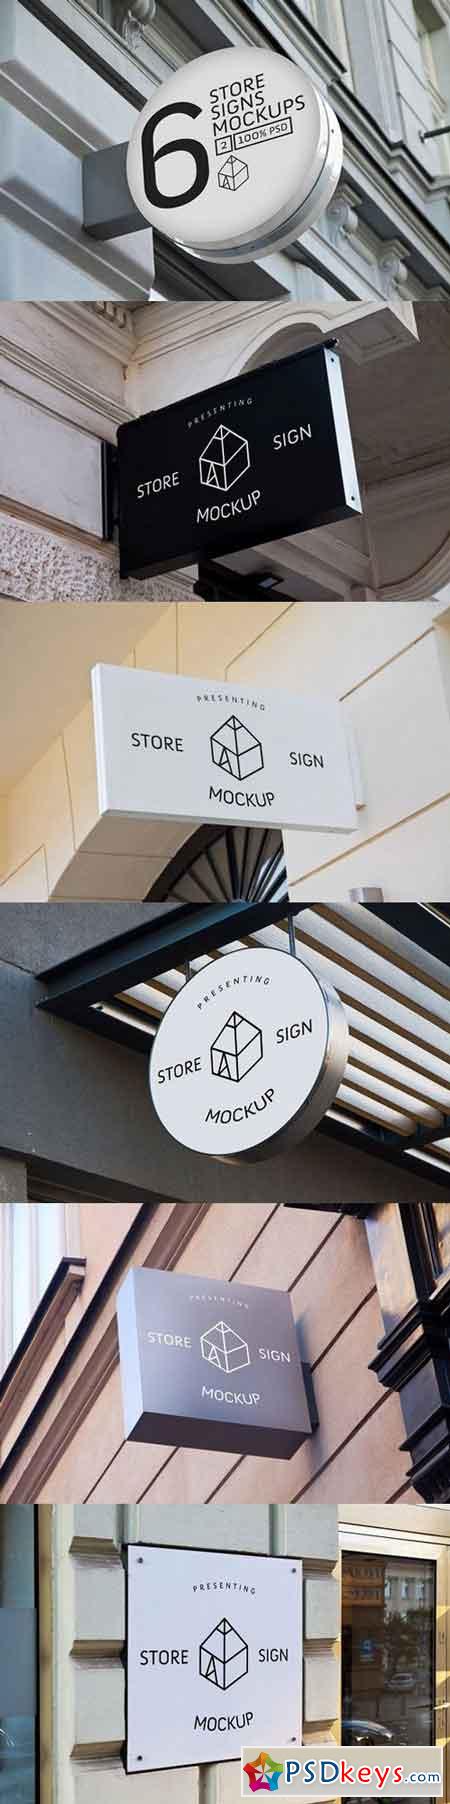 Store Signs Mock-ups 2 685102